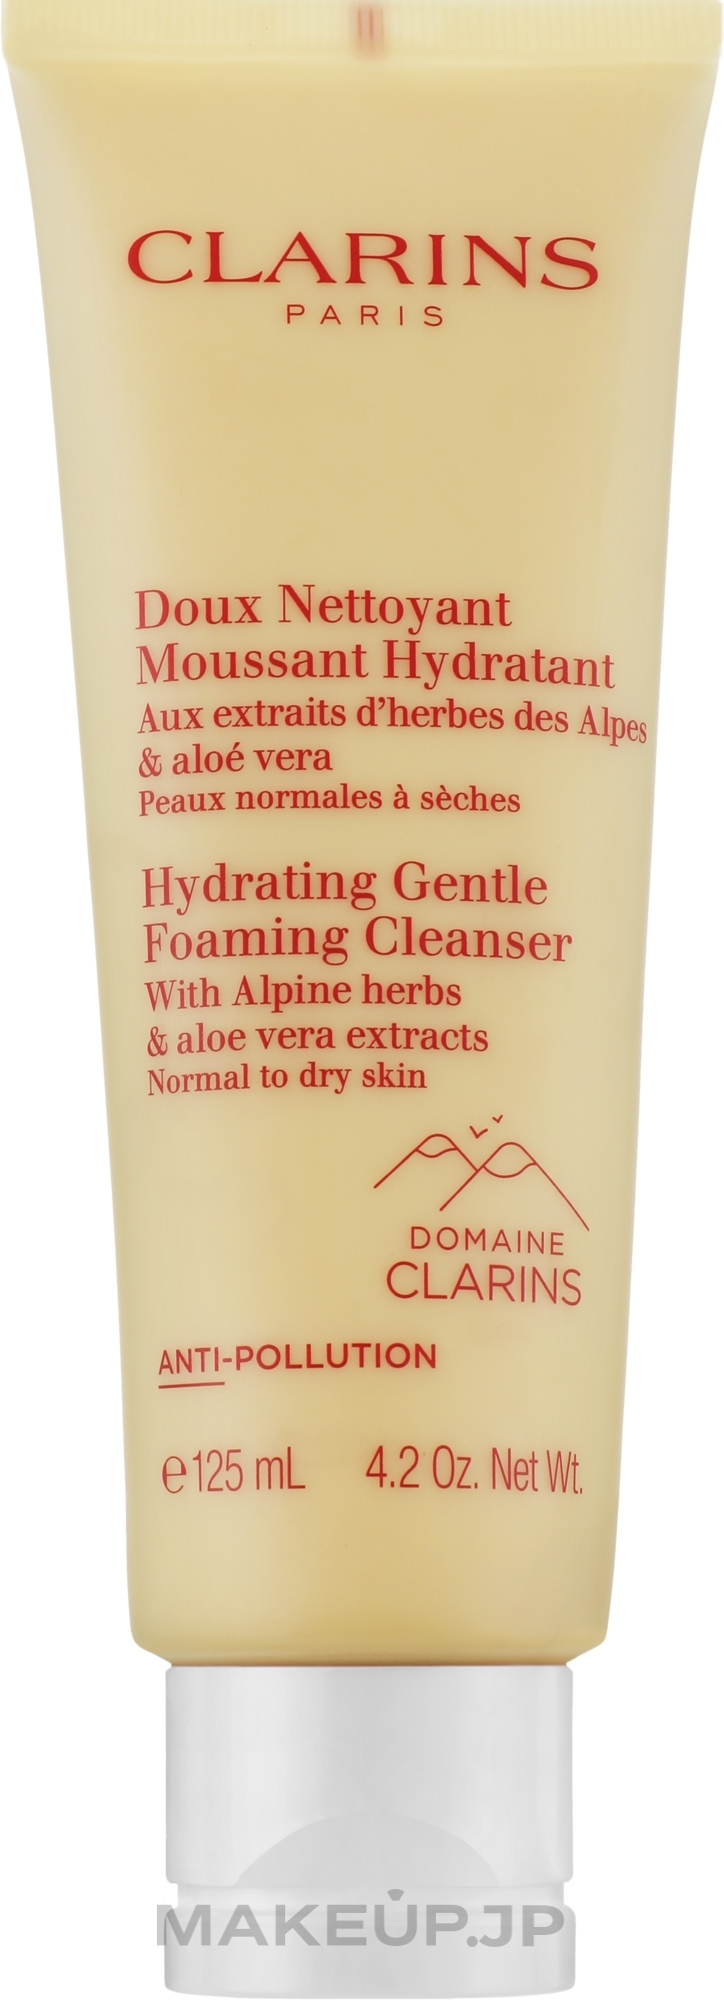 Moisturizing Foaming Cream with Alpine Herbs - Clarins Hydrating Gentle Foaming Cleanser With Alpine Herbs — photo 125 ml